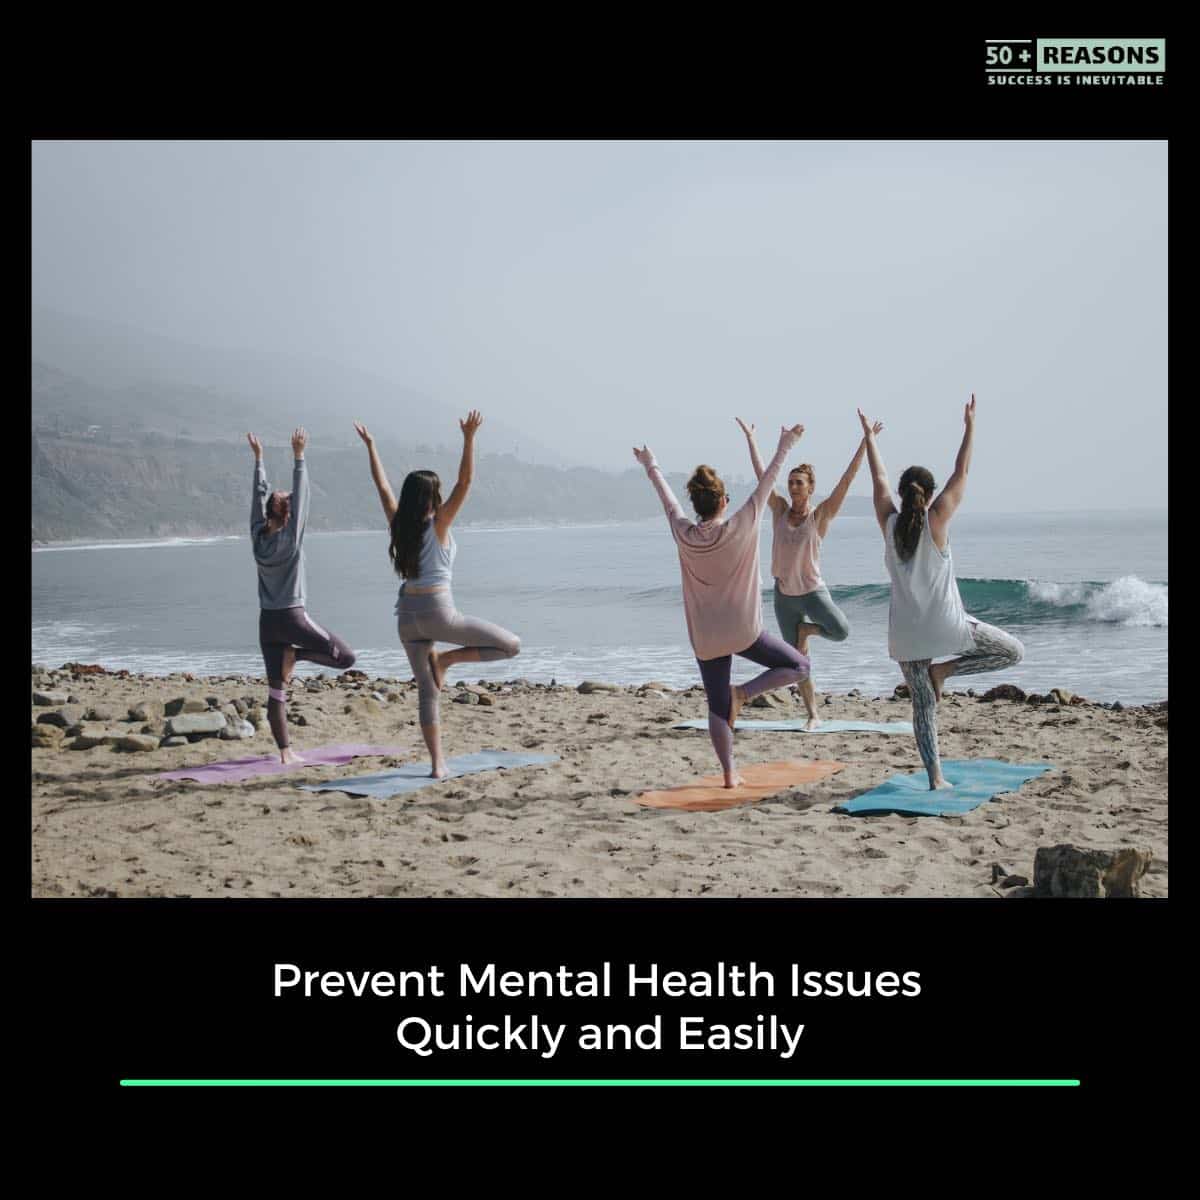 Prevent Mental Health Issues Quickly and Easily